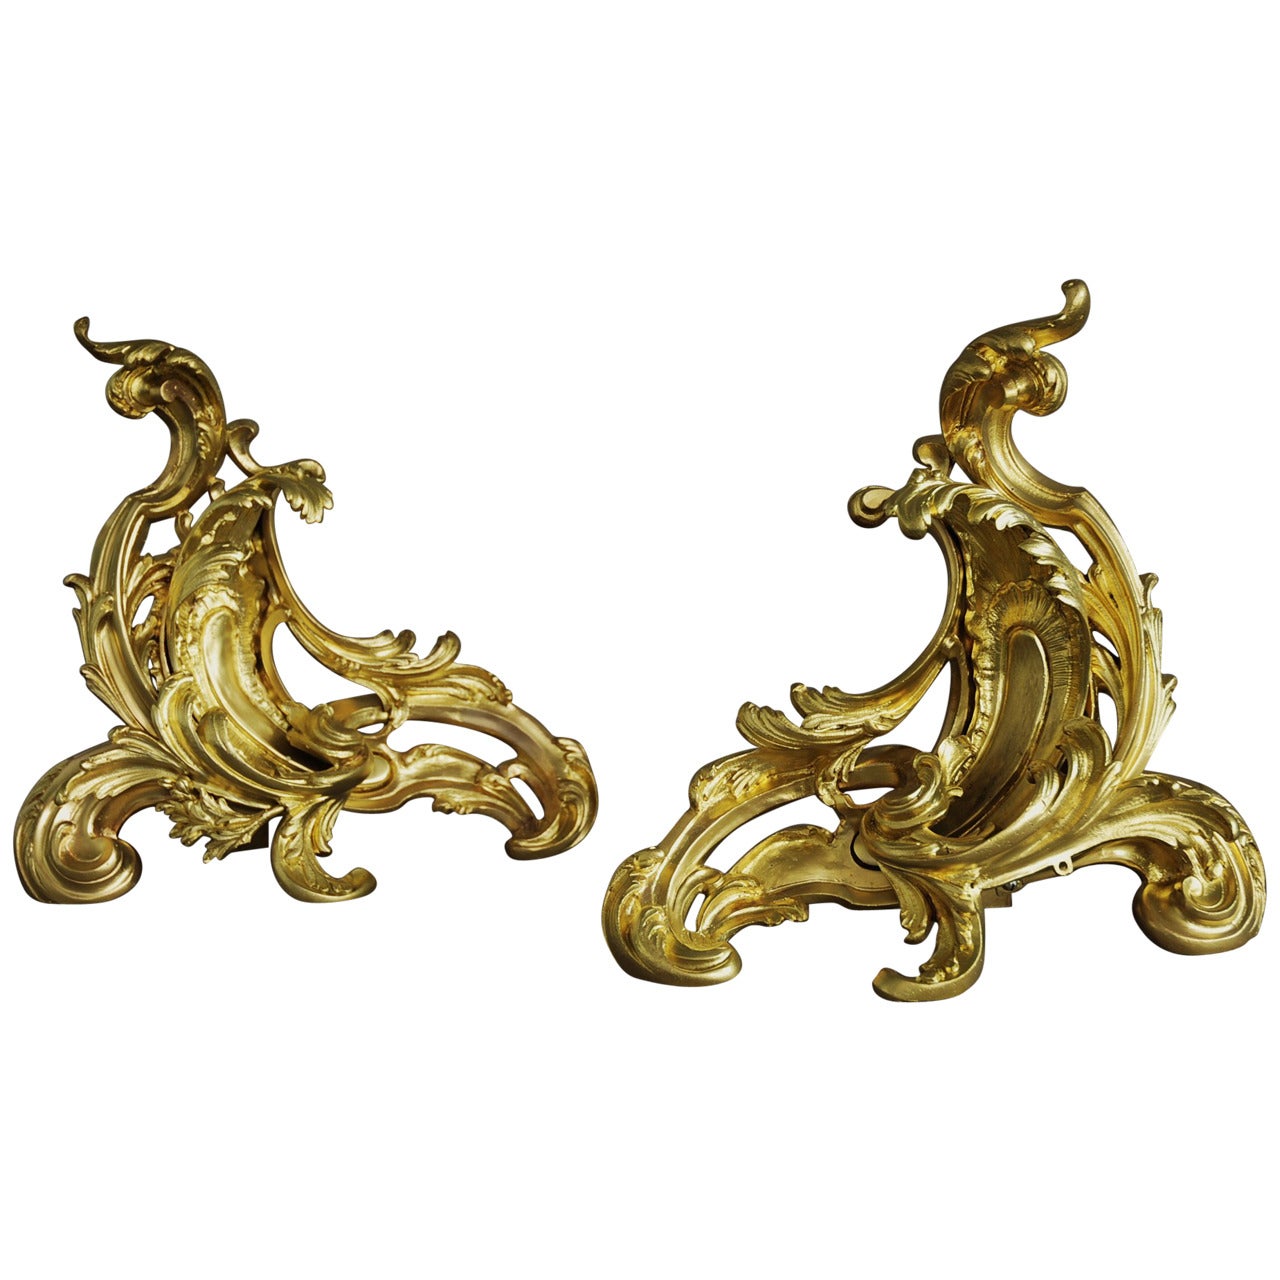 Pair of Ormolu Chenets in the Rococo Style